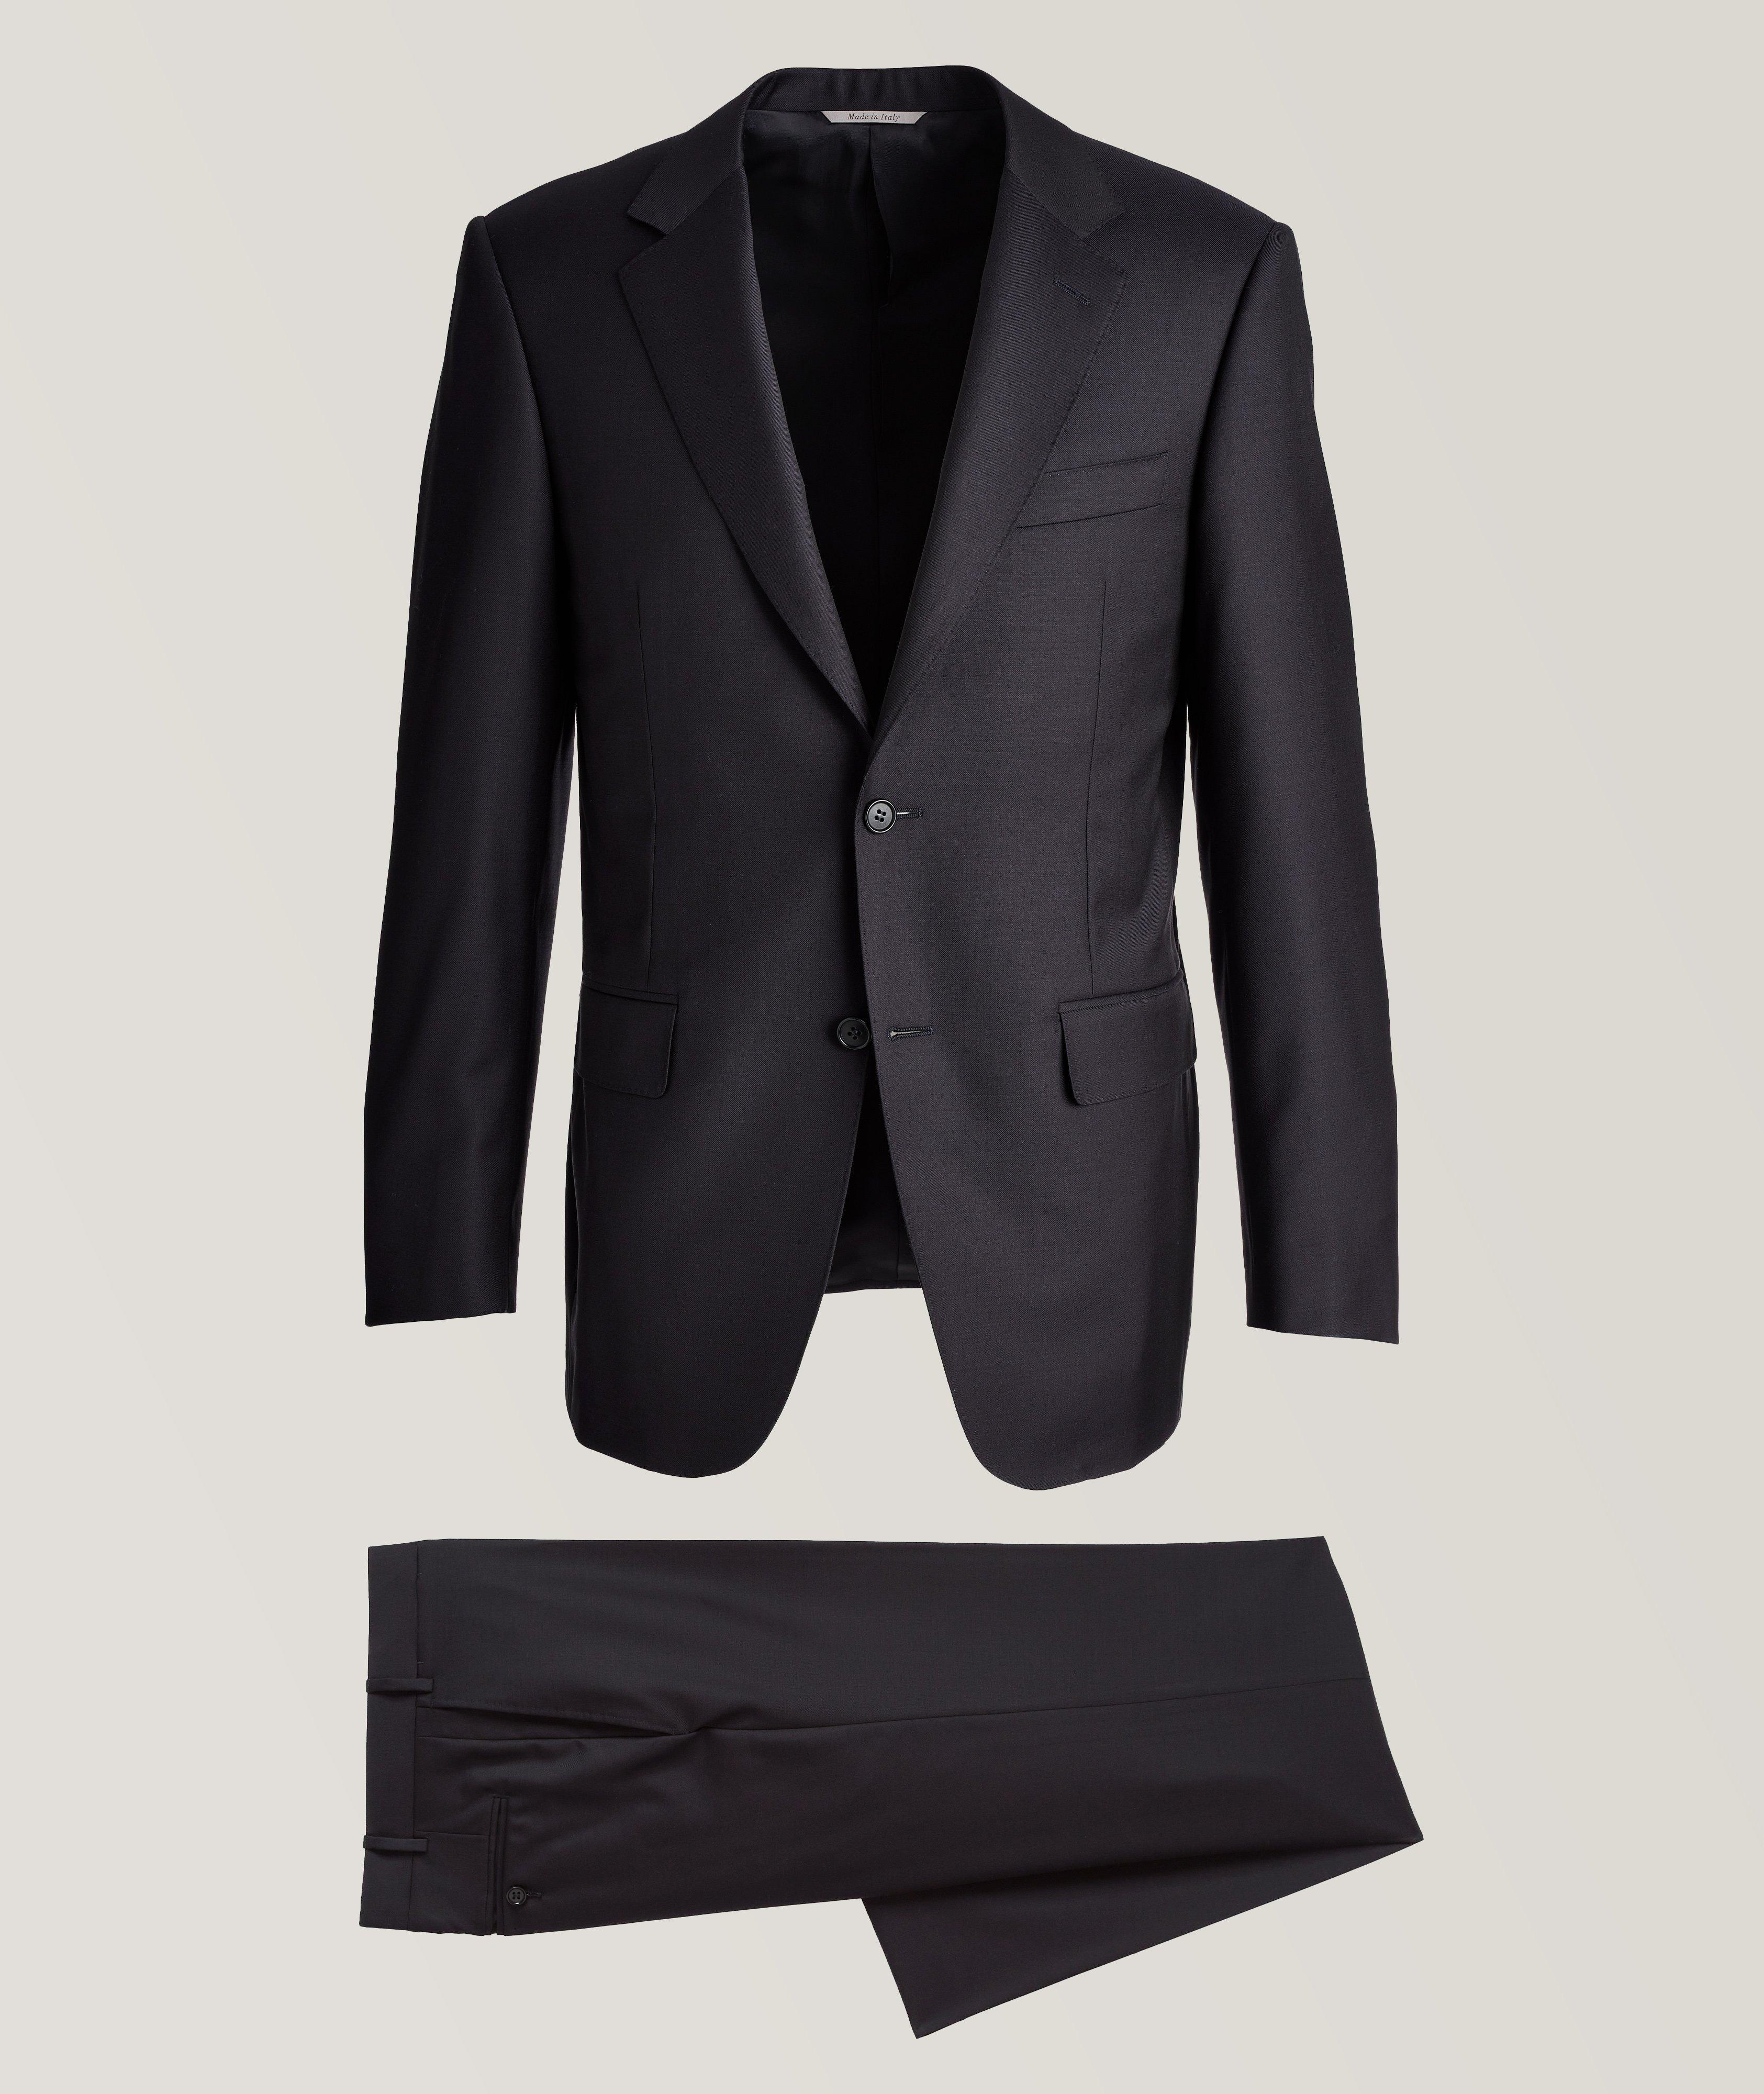 Canali Contemporary Suit | Suits | Harry Rosen